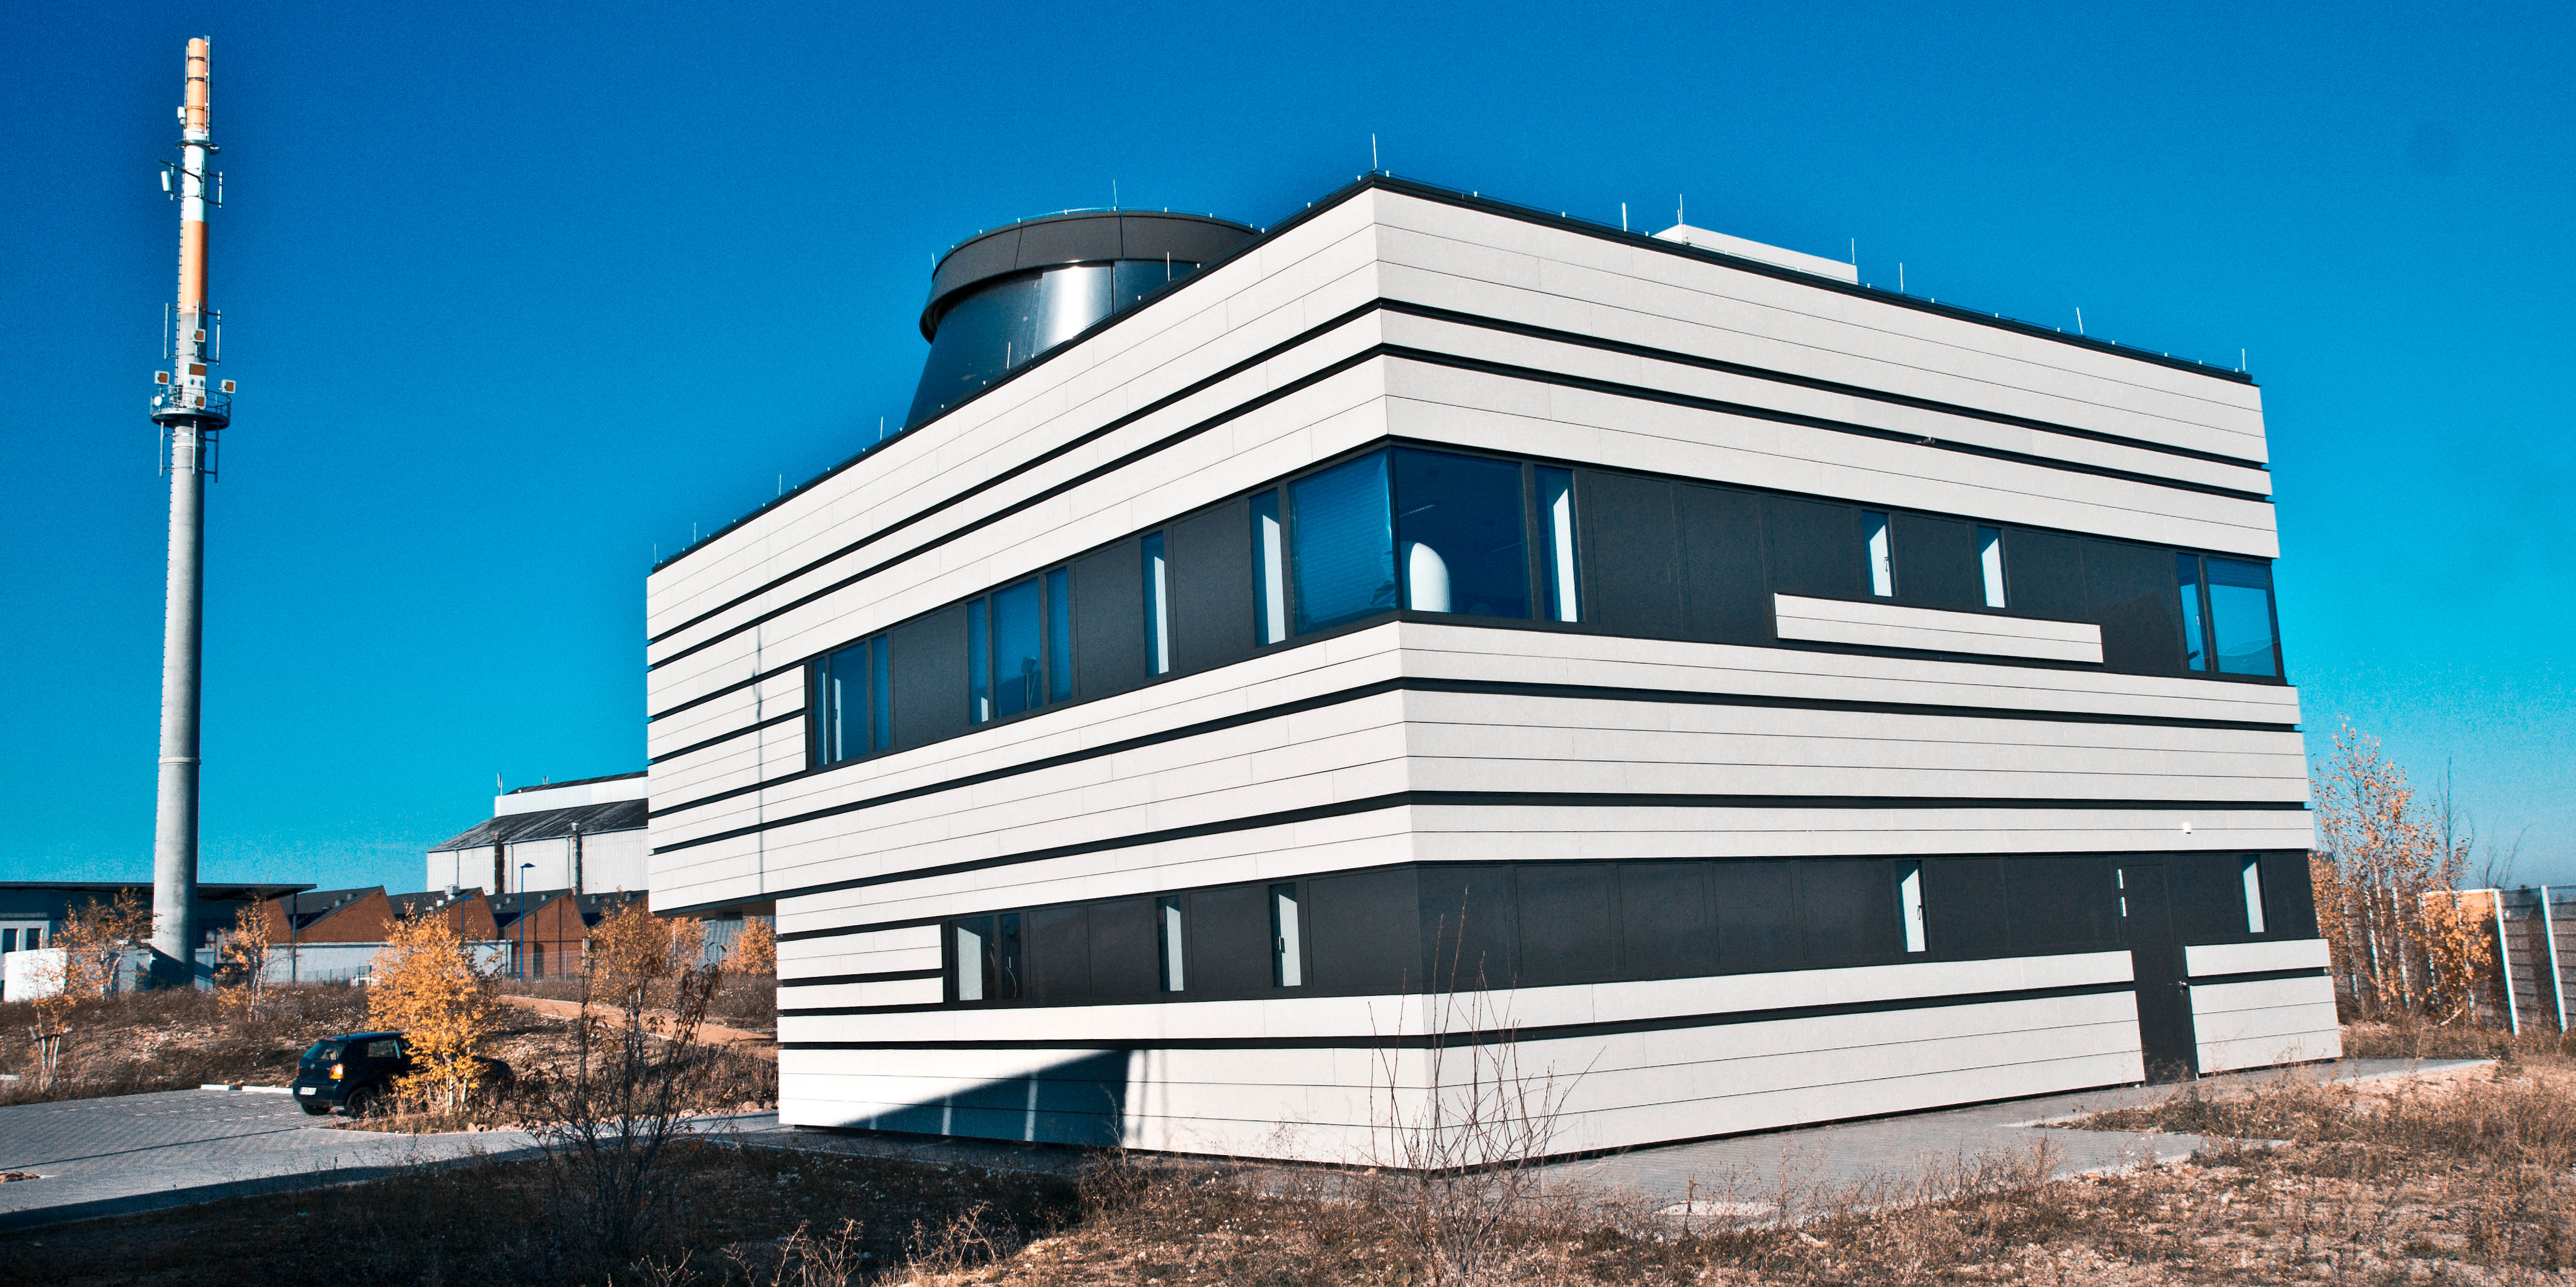 Exterior view of the FORTE test facility in Ilmenau